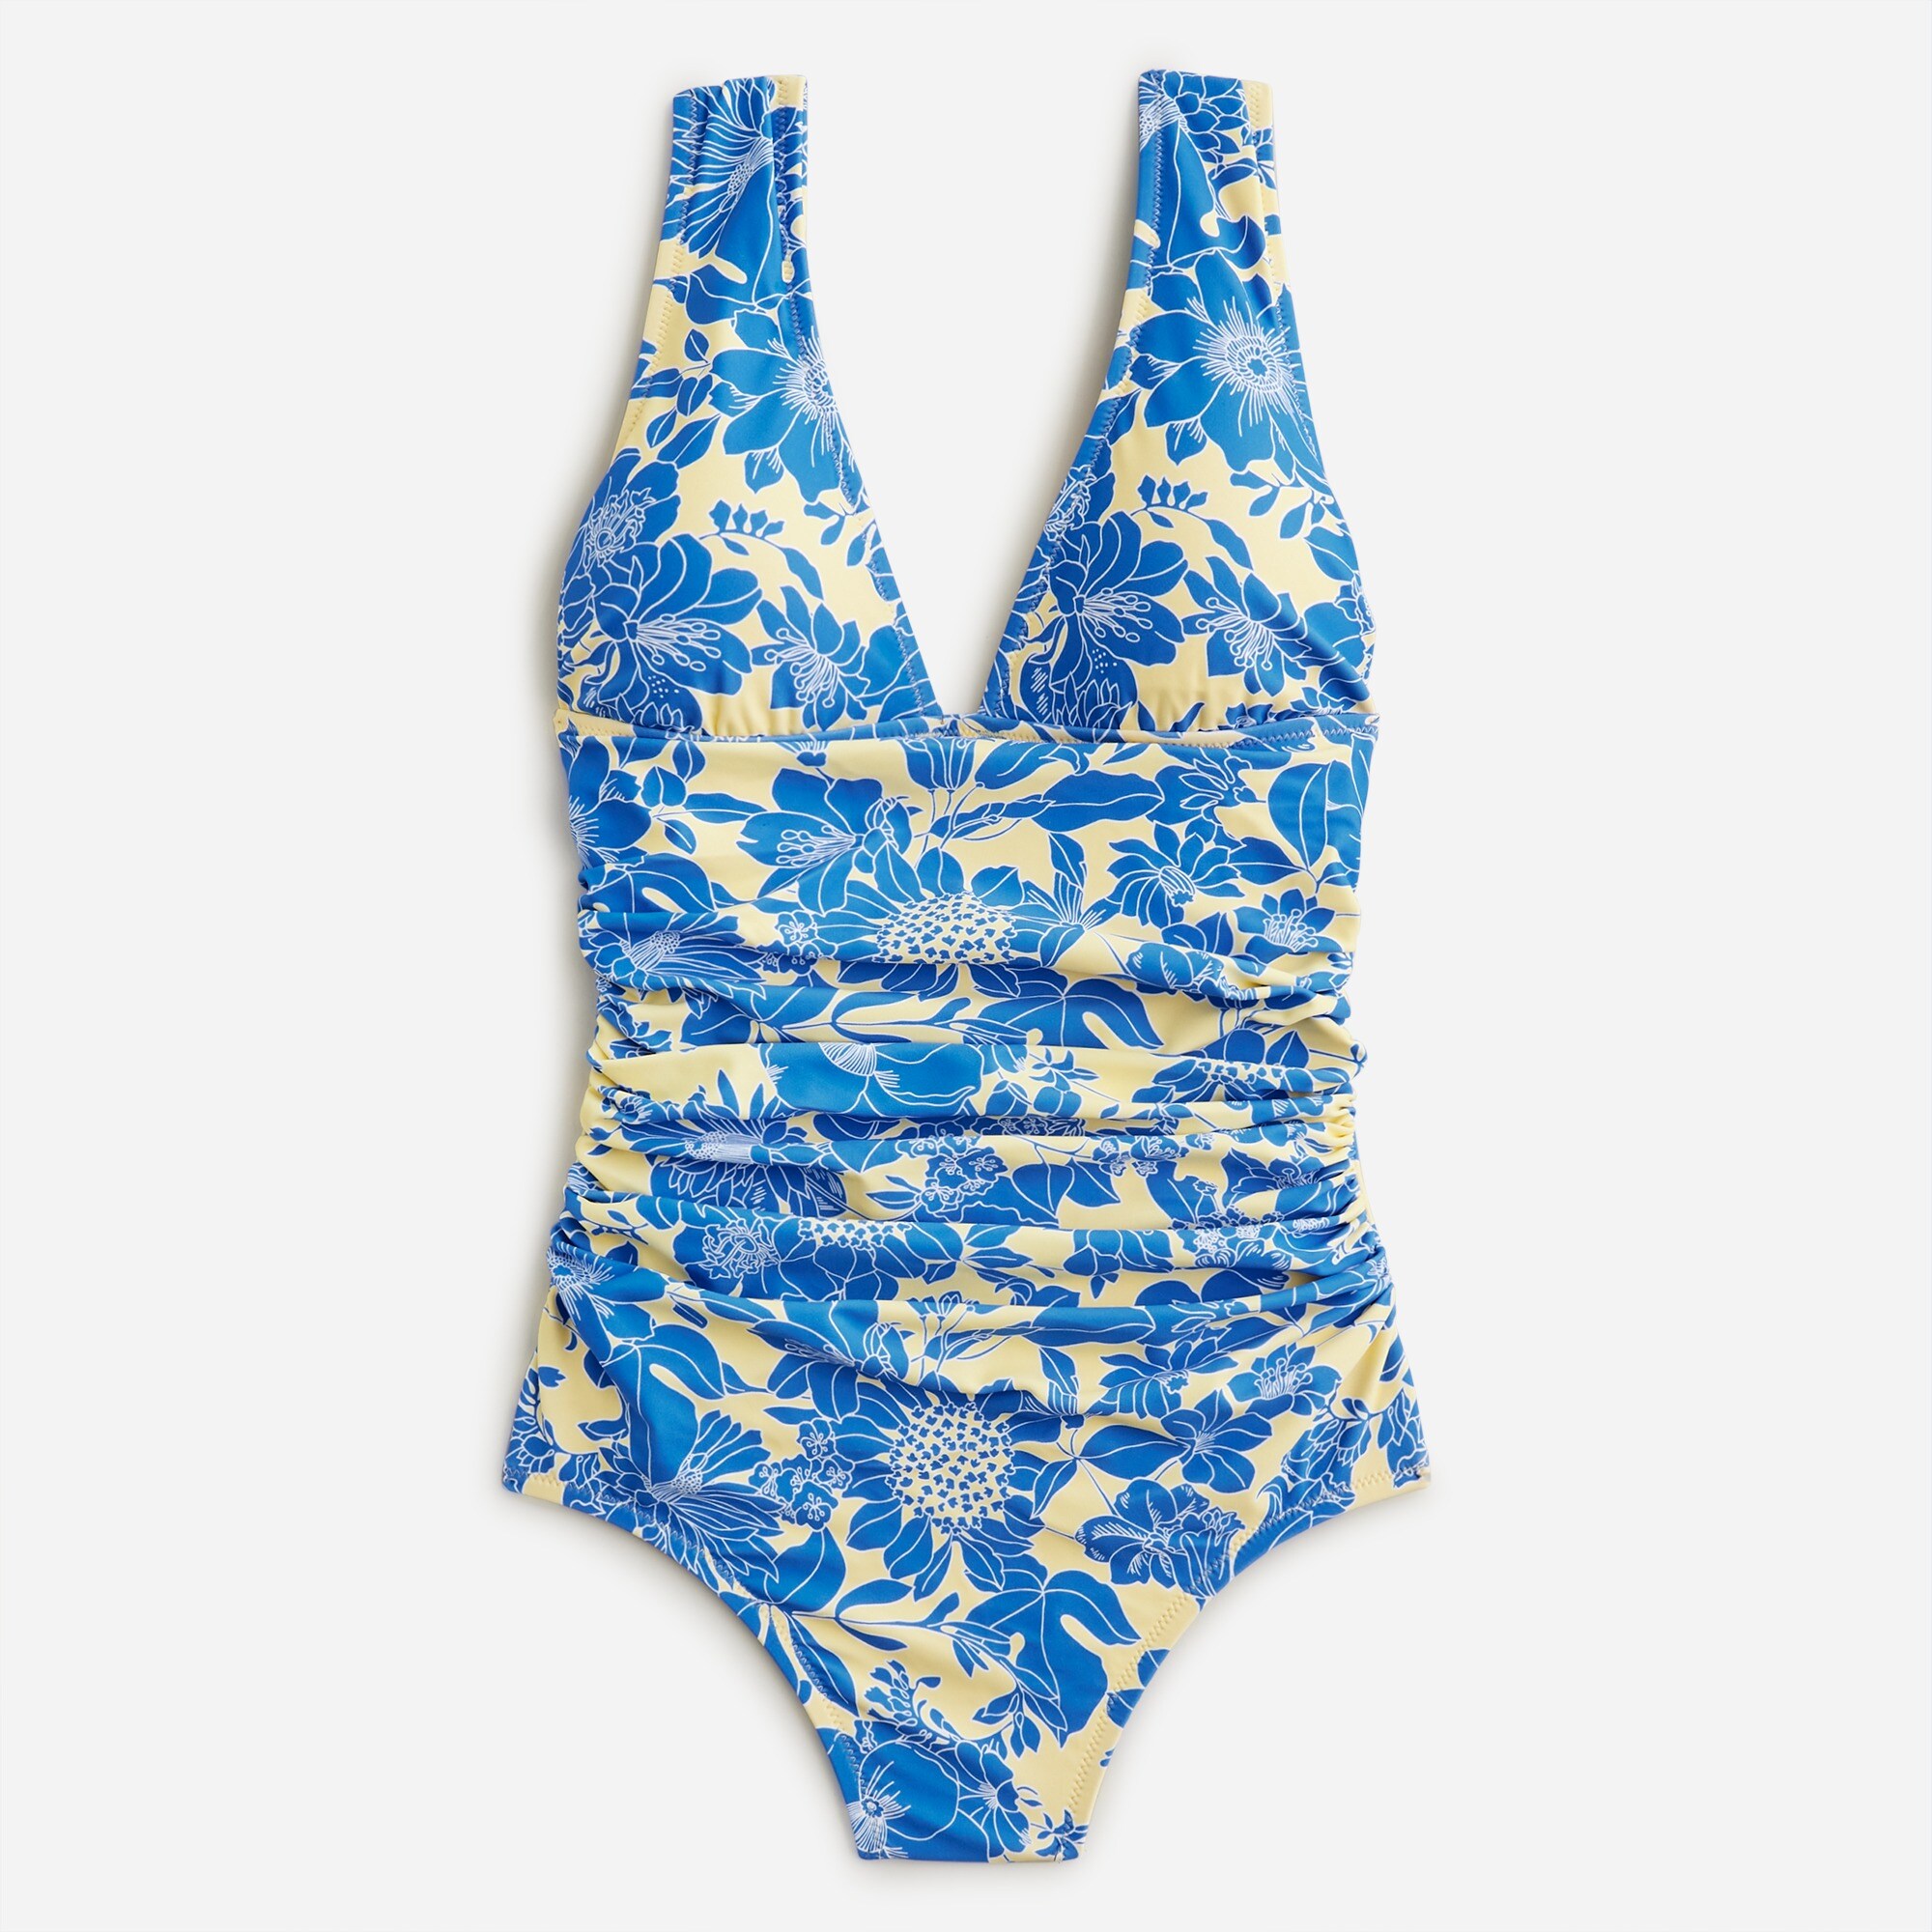  Ruched V-neck one-piece full-coverage swimsuit in blue floral